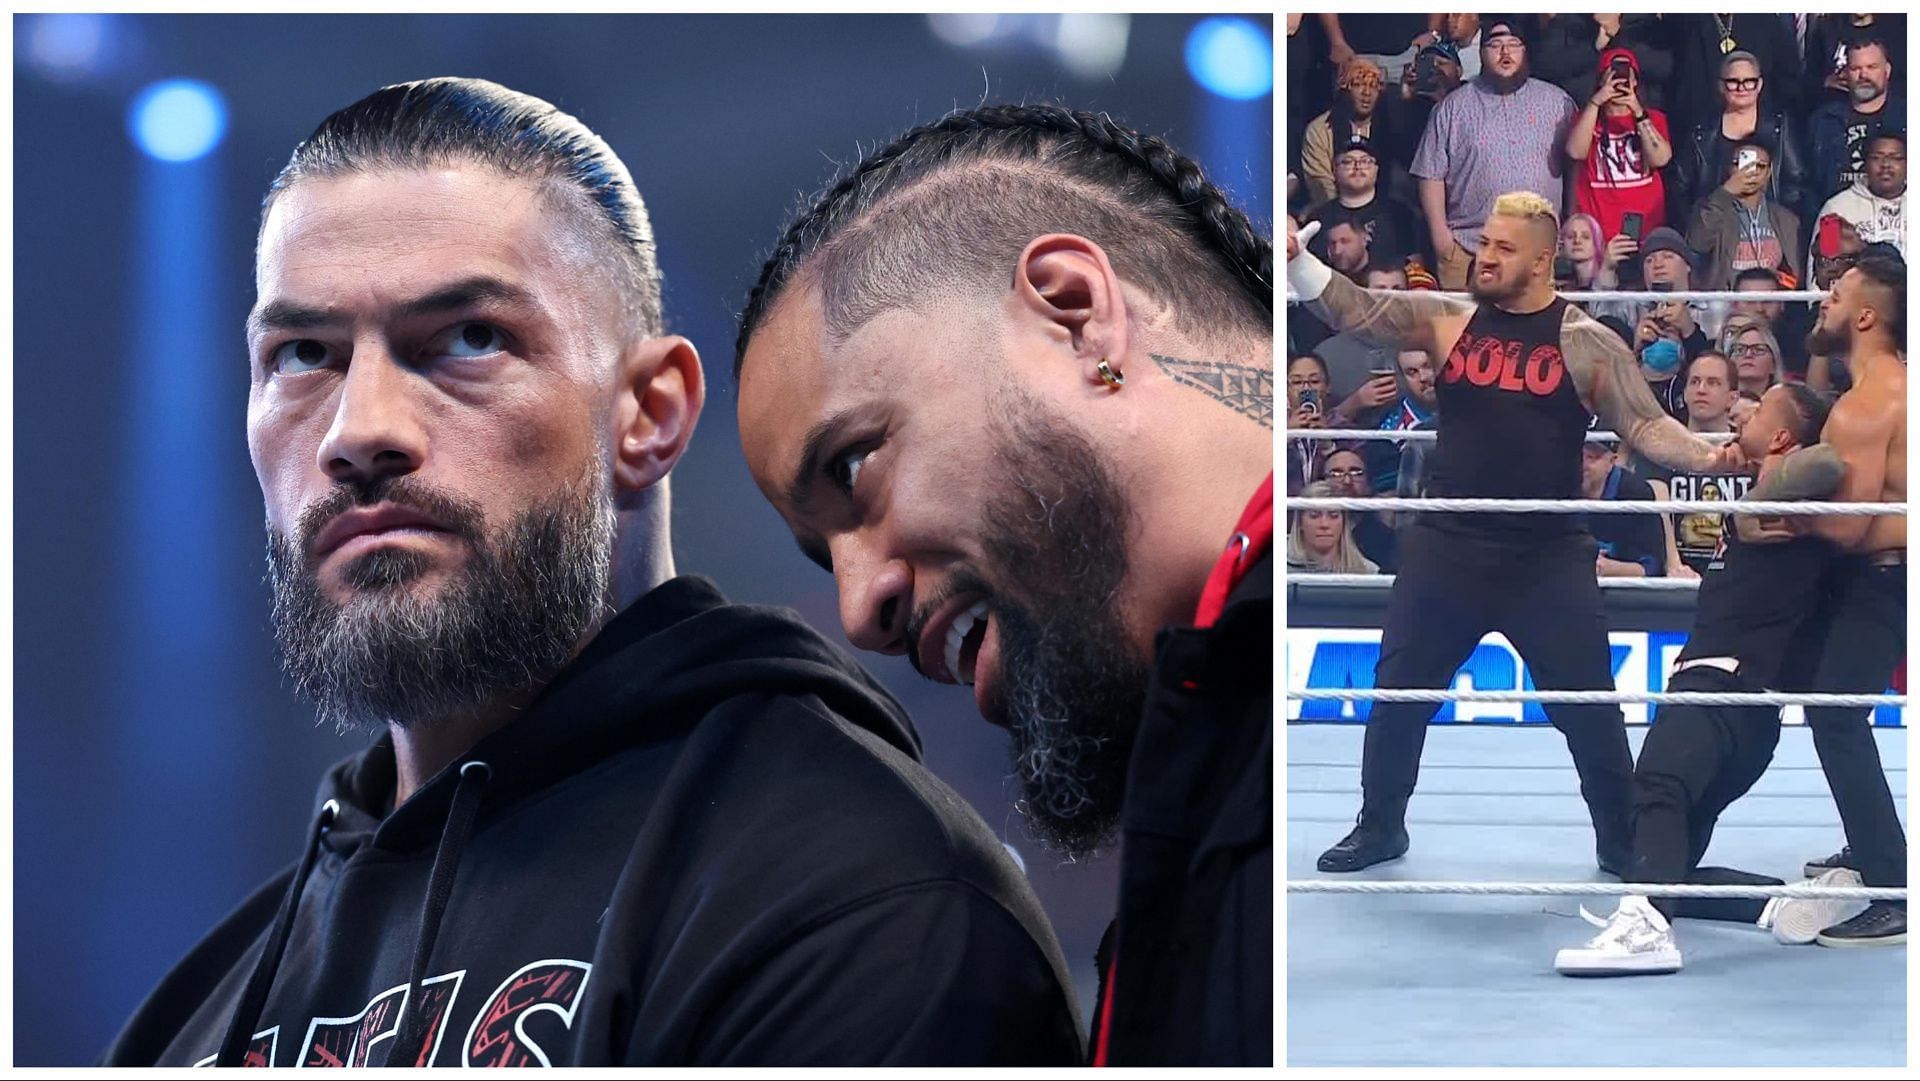 Roman Reigns and Jimmy Uso speak on WWE SmackDown, Solo Sikoa and Tama Tonga turn on Jimmy Uso